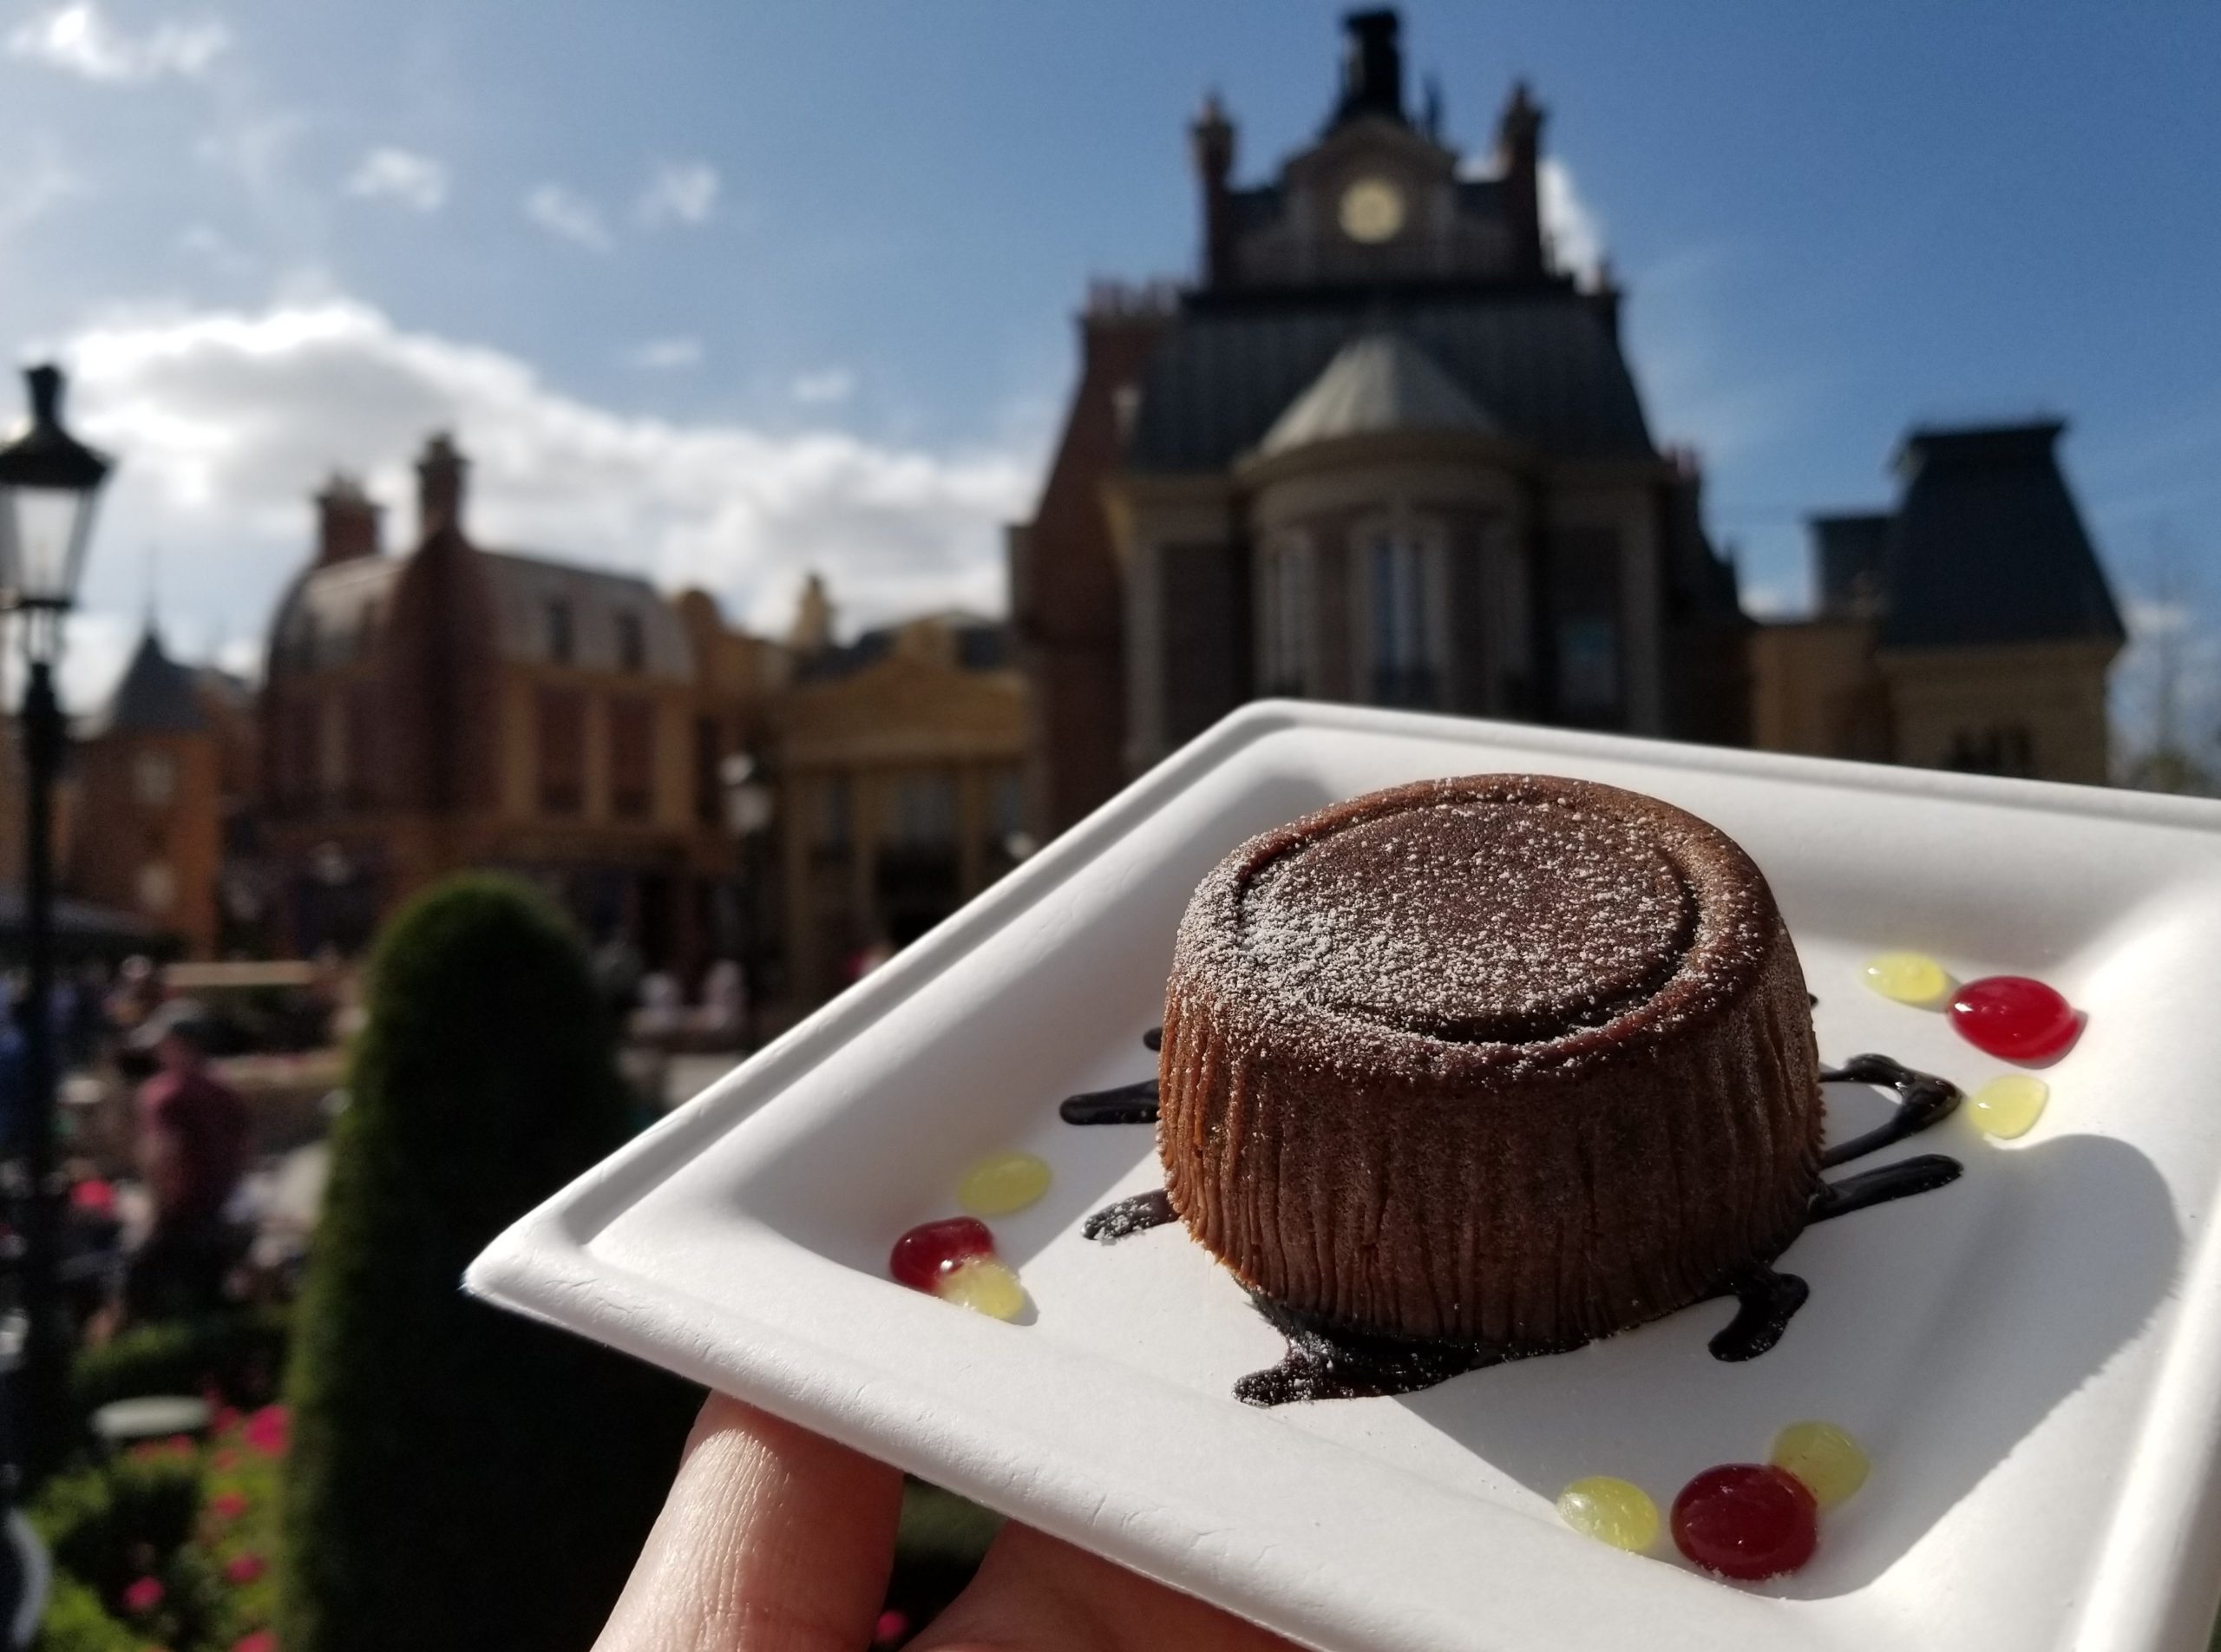 Moelleux Aux Chocolats Valrhona: Molten Chocolate Cake with Pure Origin Valrhona Chocolates from L’Art du Cuisine Francaise in France 